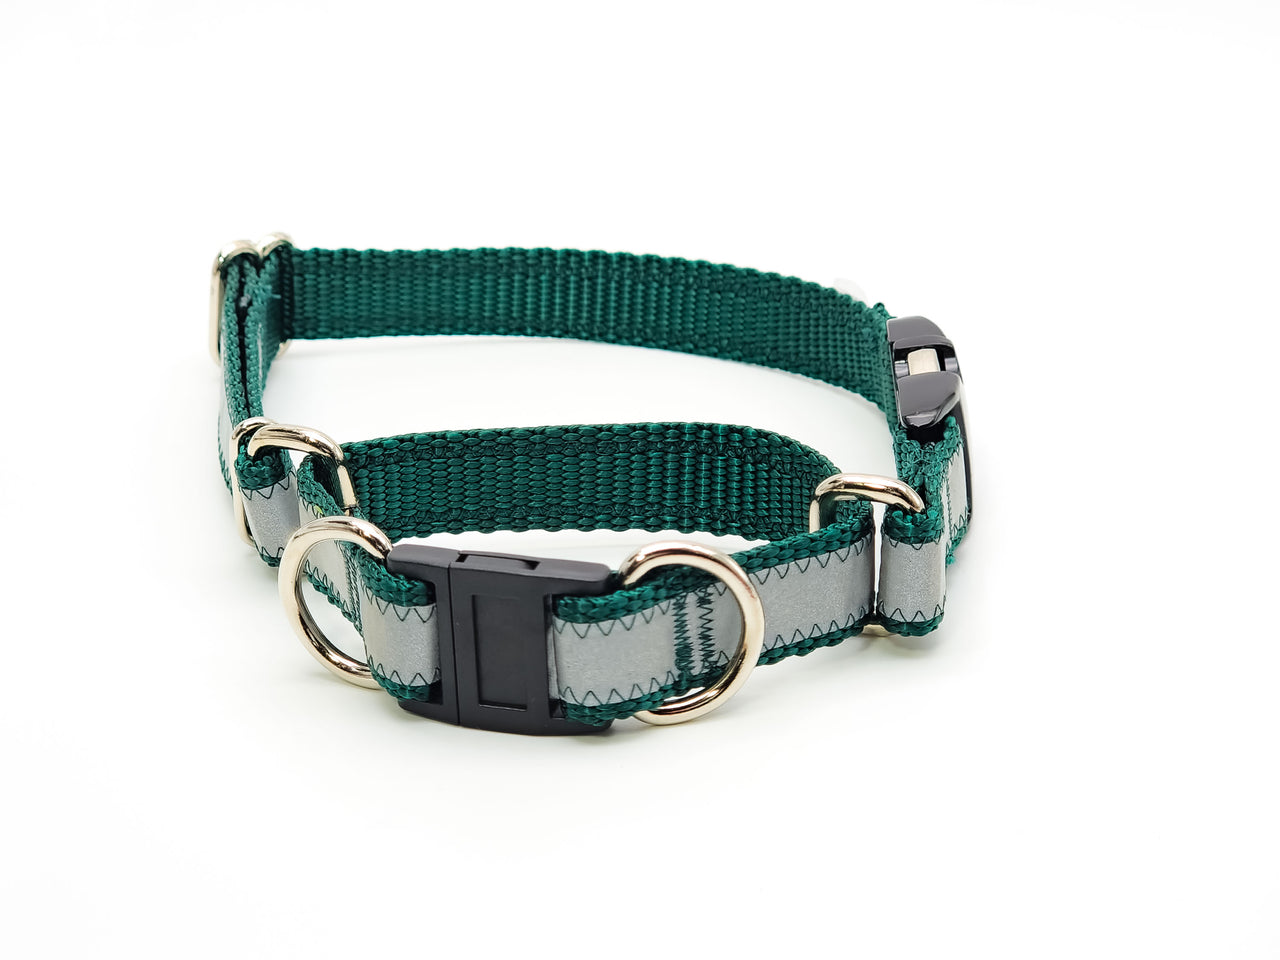 Semi-Breakaway Quick Release Martingale | Reflective emerald | Large 16"-20" in 3/4" wide